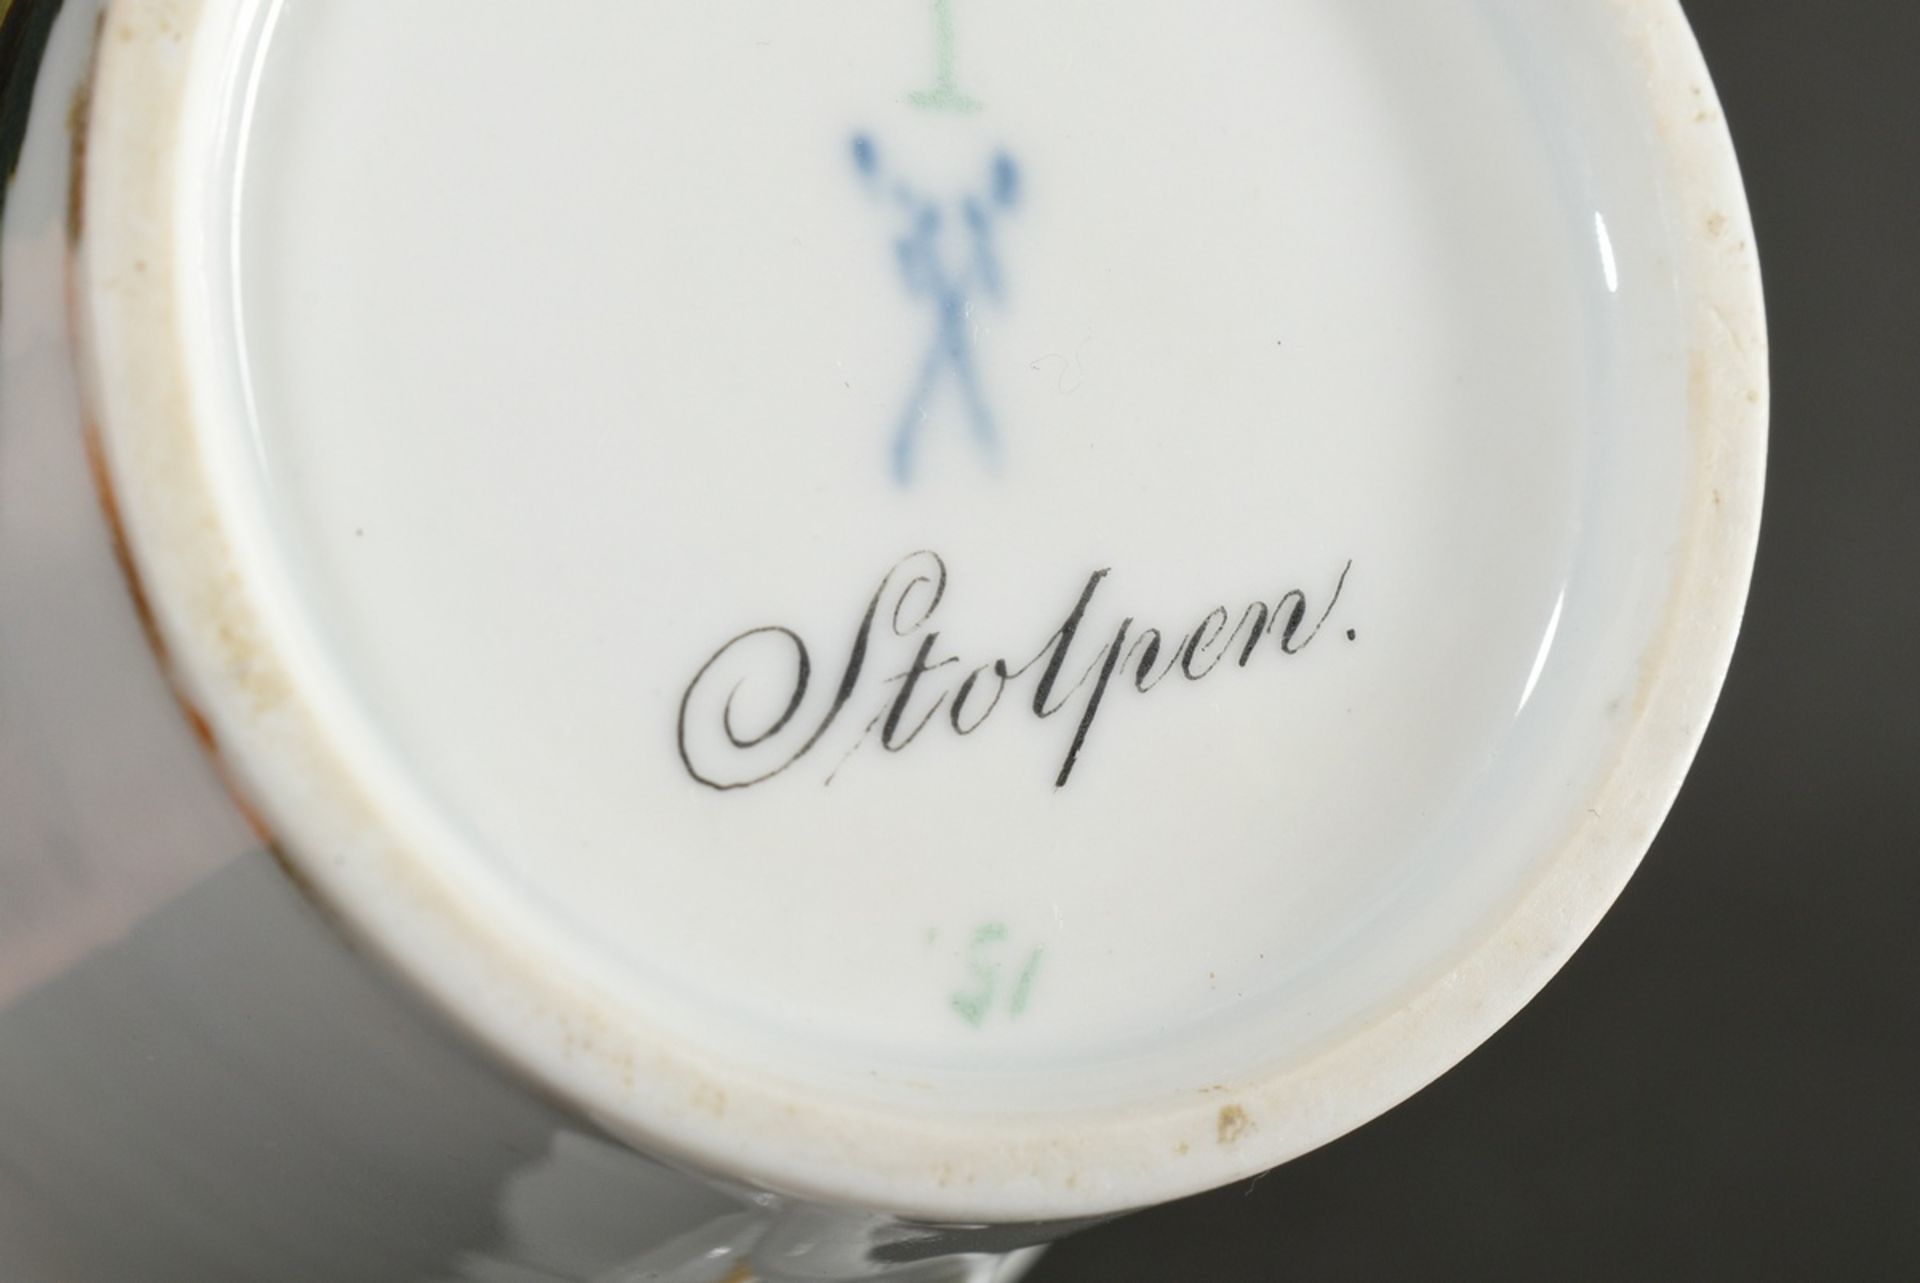 Meissen Biedermeier cup/saucer with flawless depiction of "Stolpen", 19th c., h. 9cm, rubbed gold r - Image 5 of 6